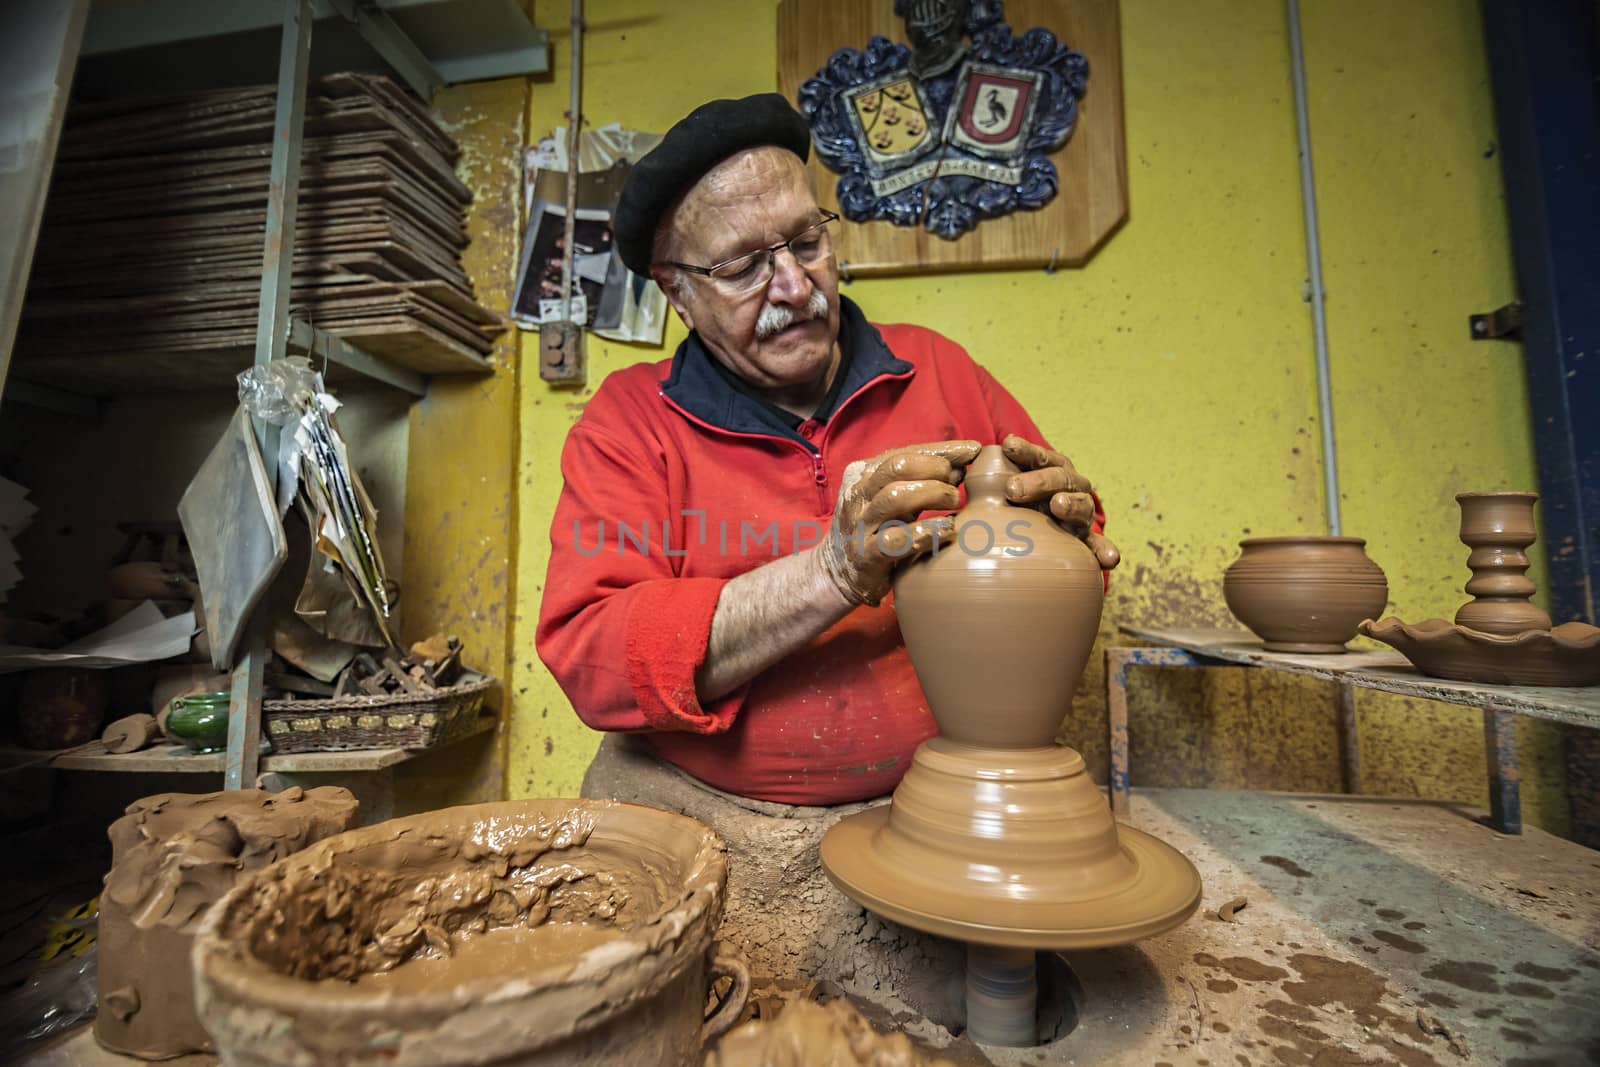 Potter making a water jug in classic mud, clay pottery ceramics typical of Bailen, Jaen province, Andalucia, Spain